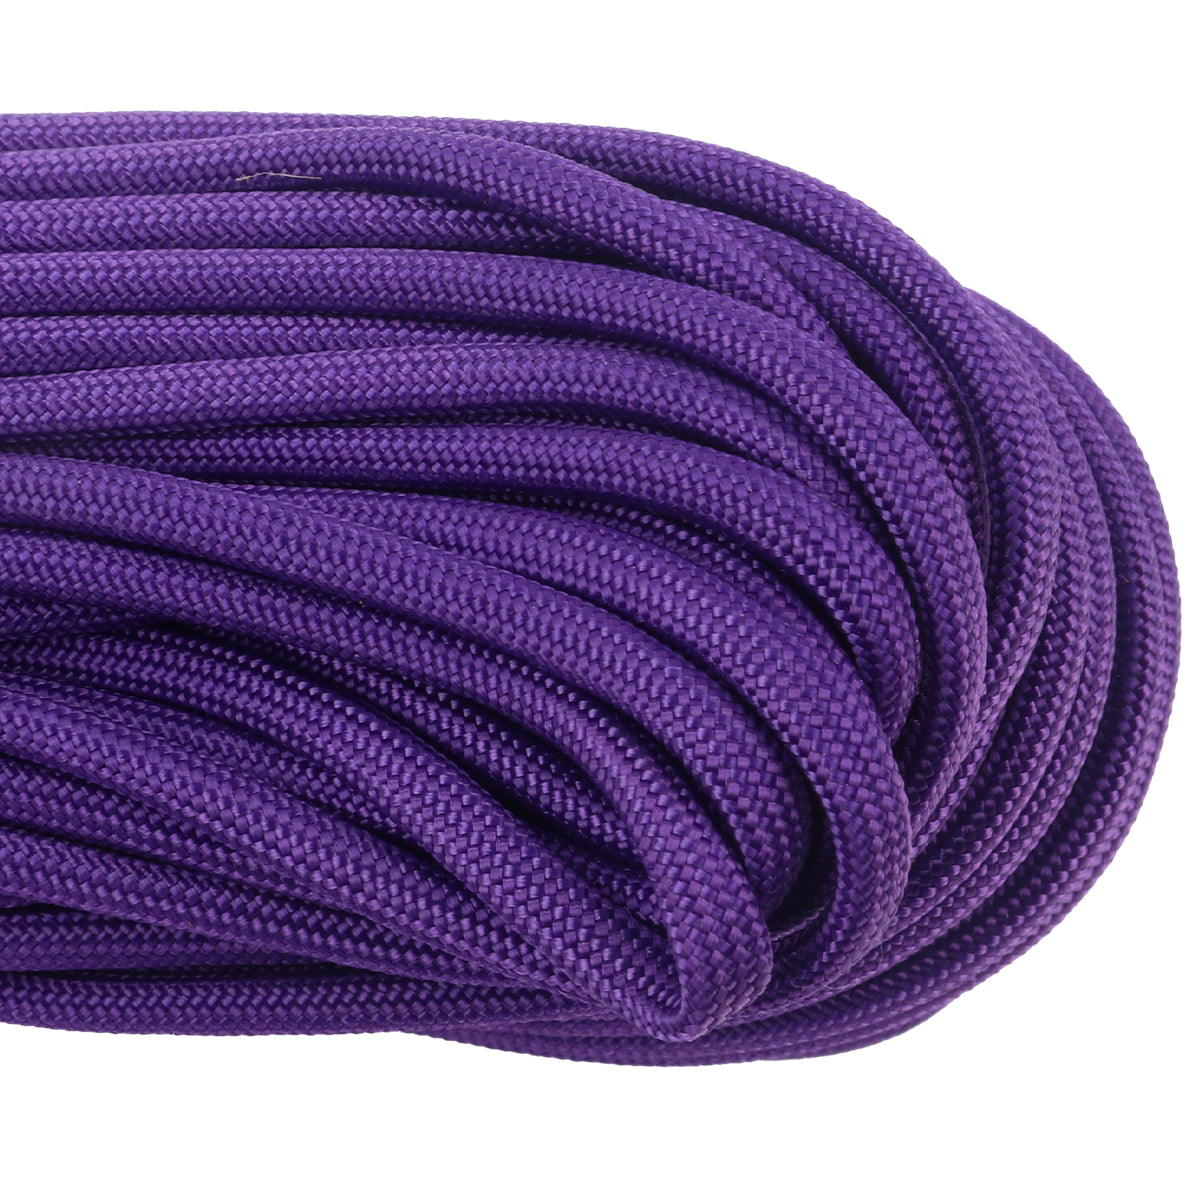 550 Paracord, 100 ft, Solid Color